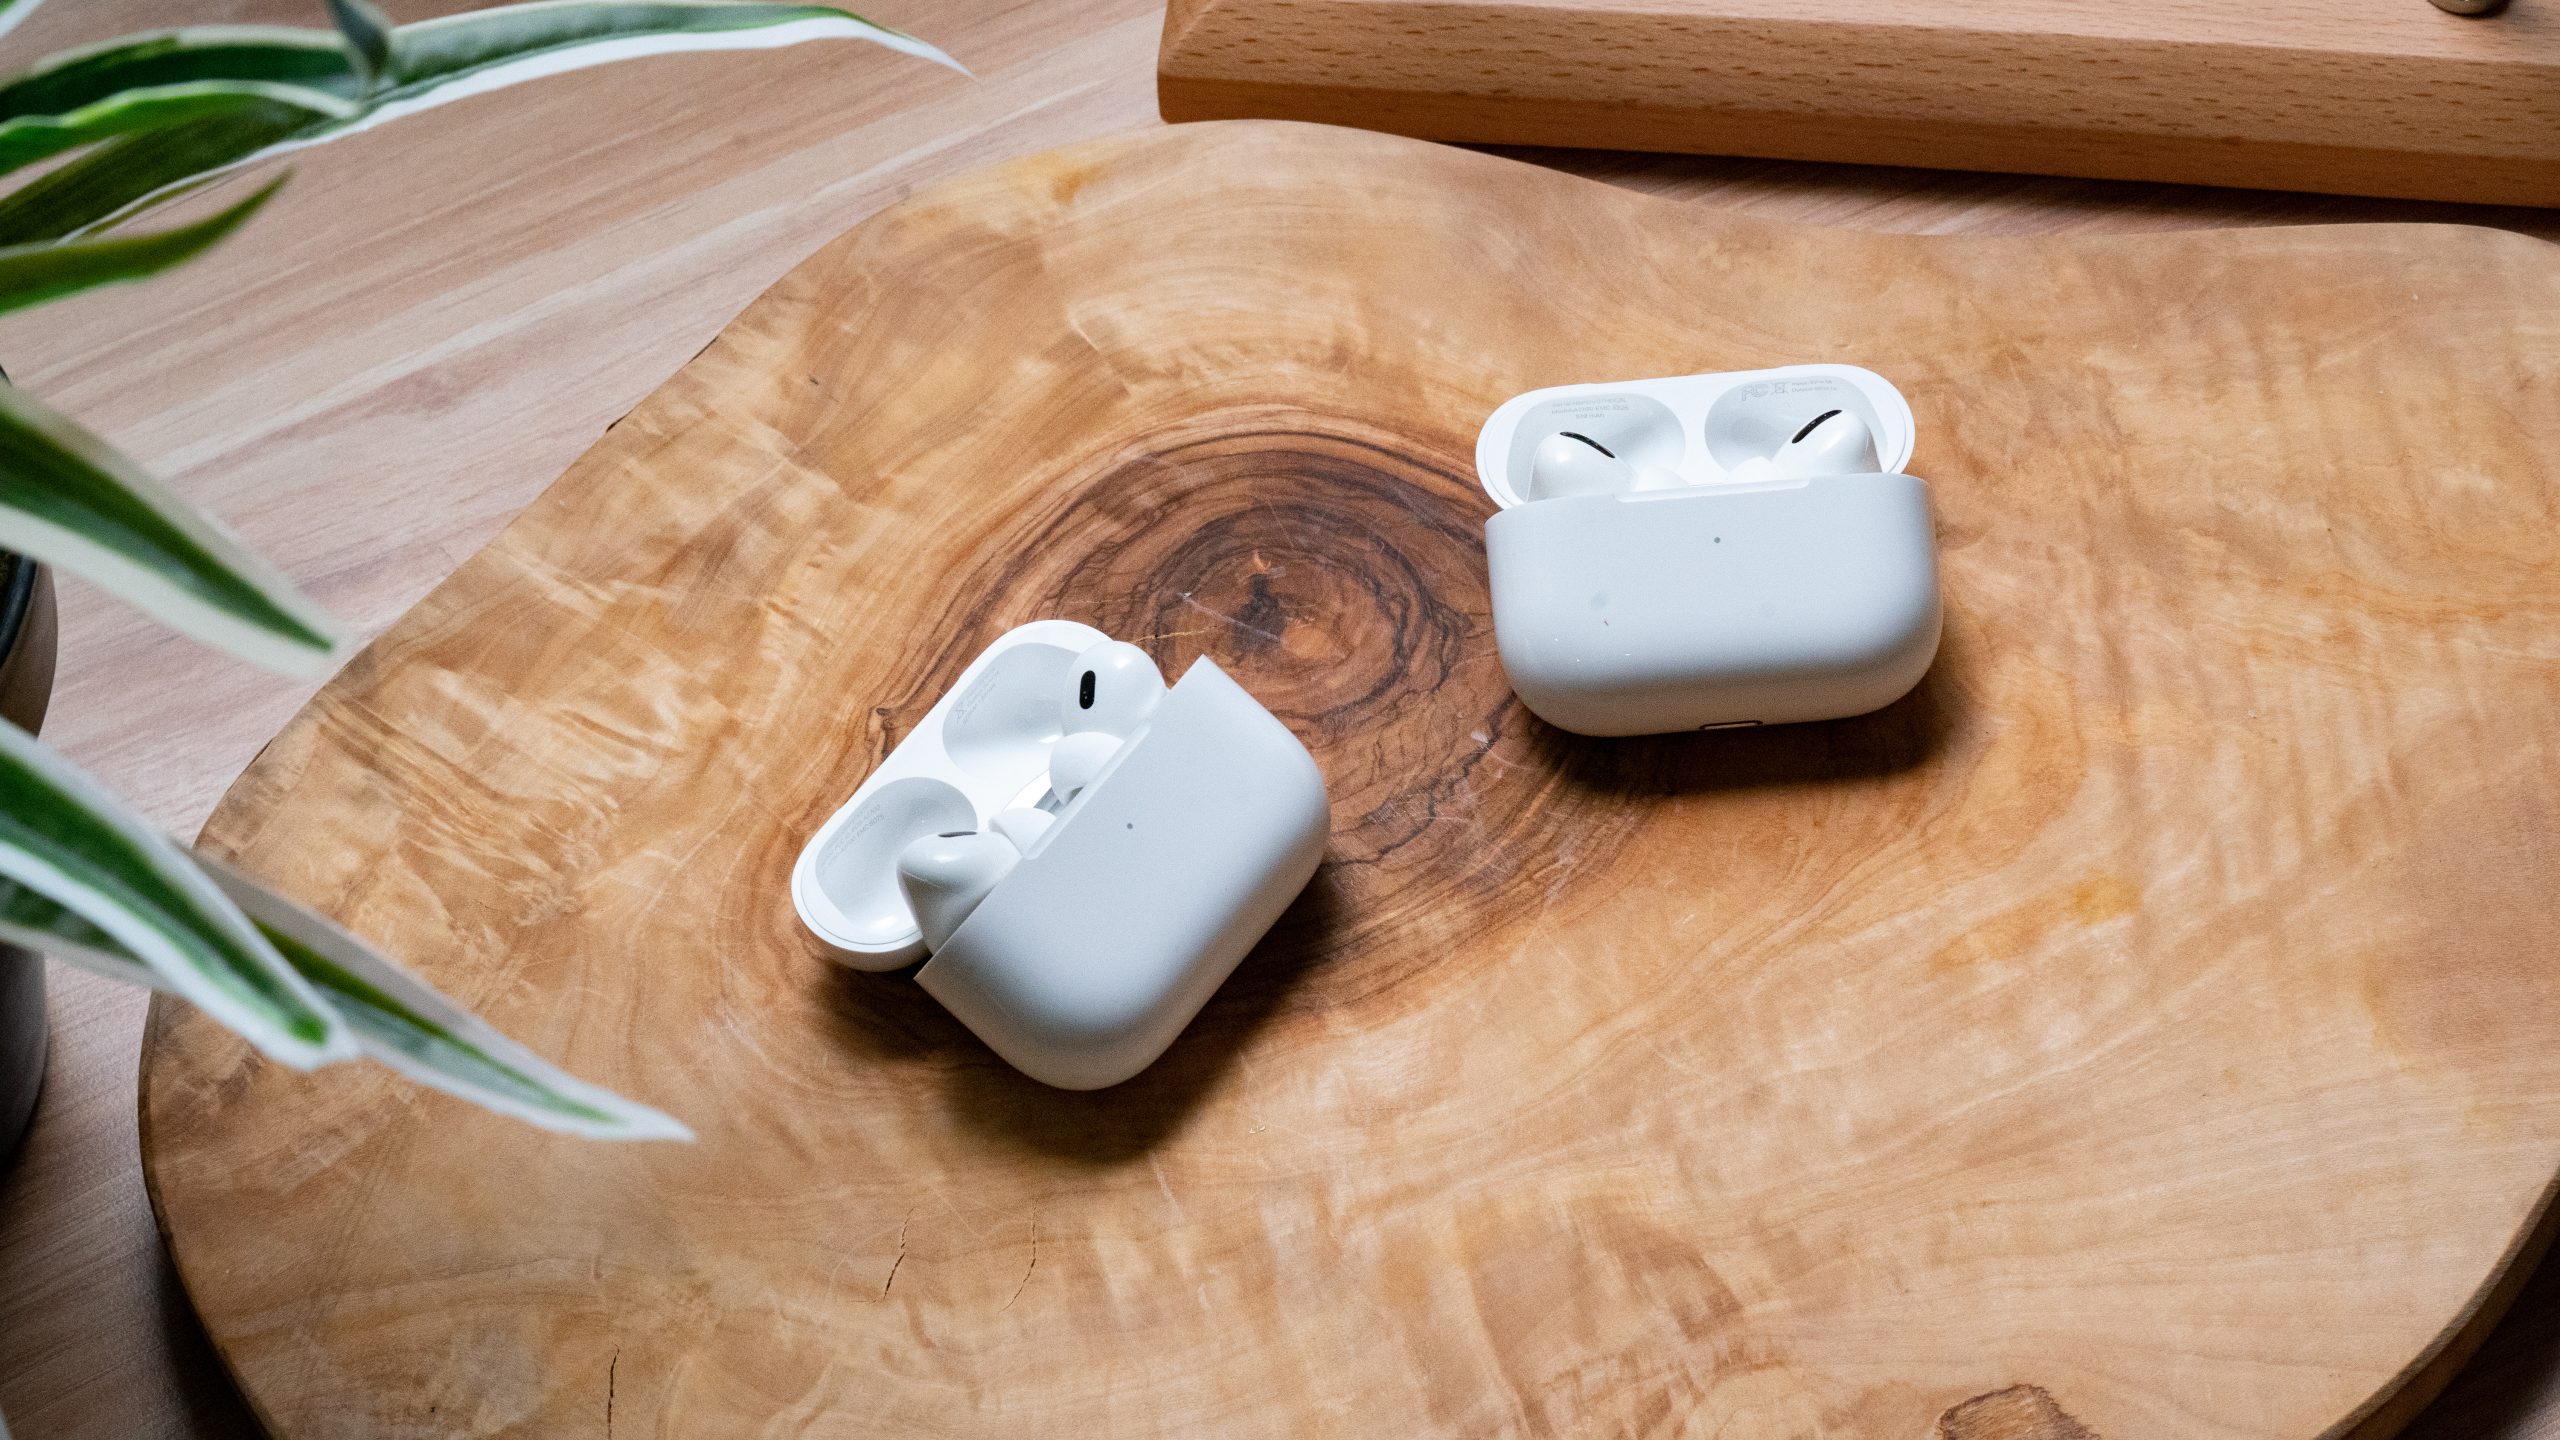 Apple AirPods Pro (2nd generation) vs Apple AirPods (1st generation) -